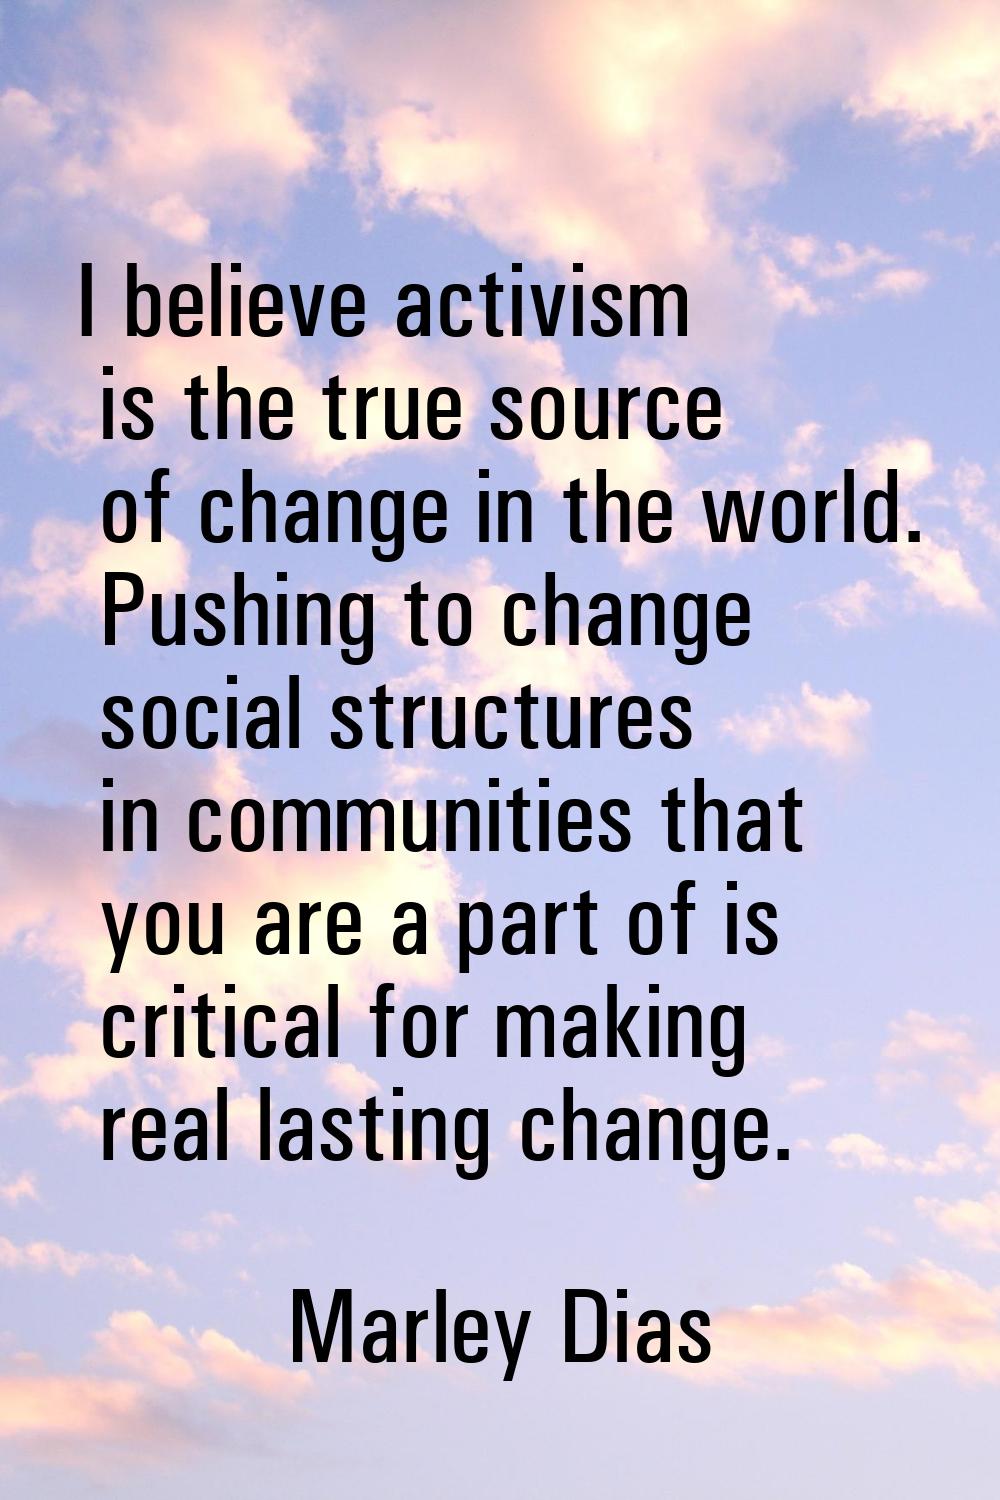 I believe activism is the true source of change in the world. Pushing to change social structures i